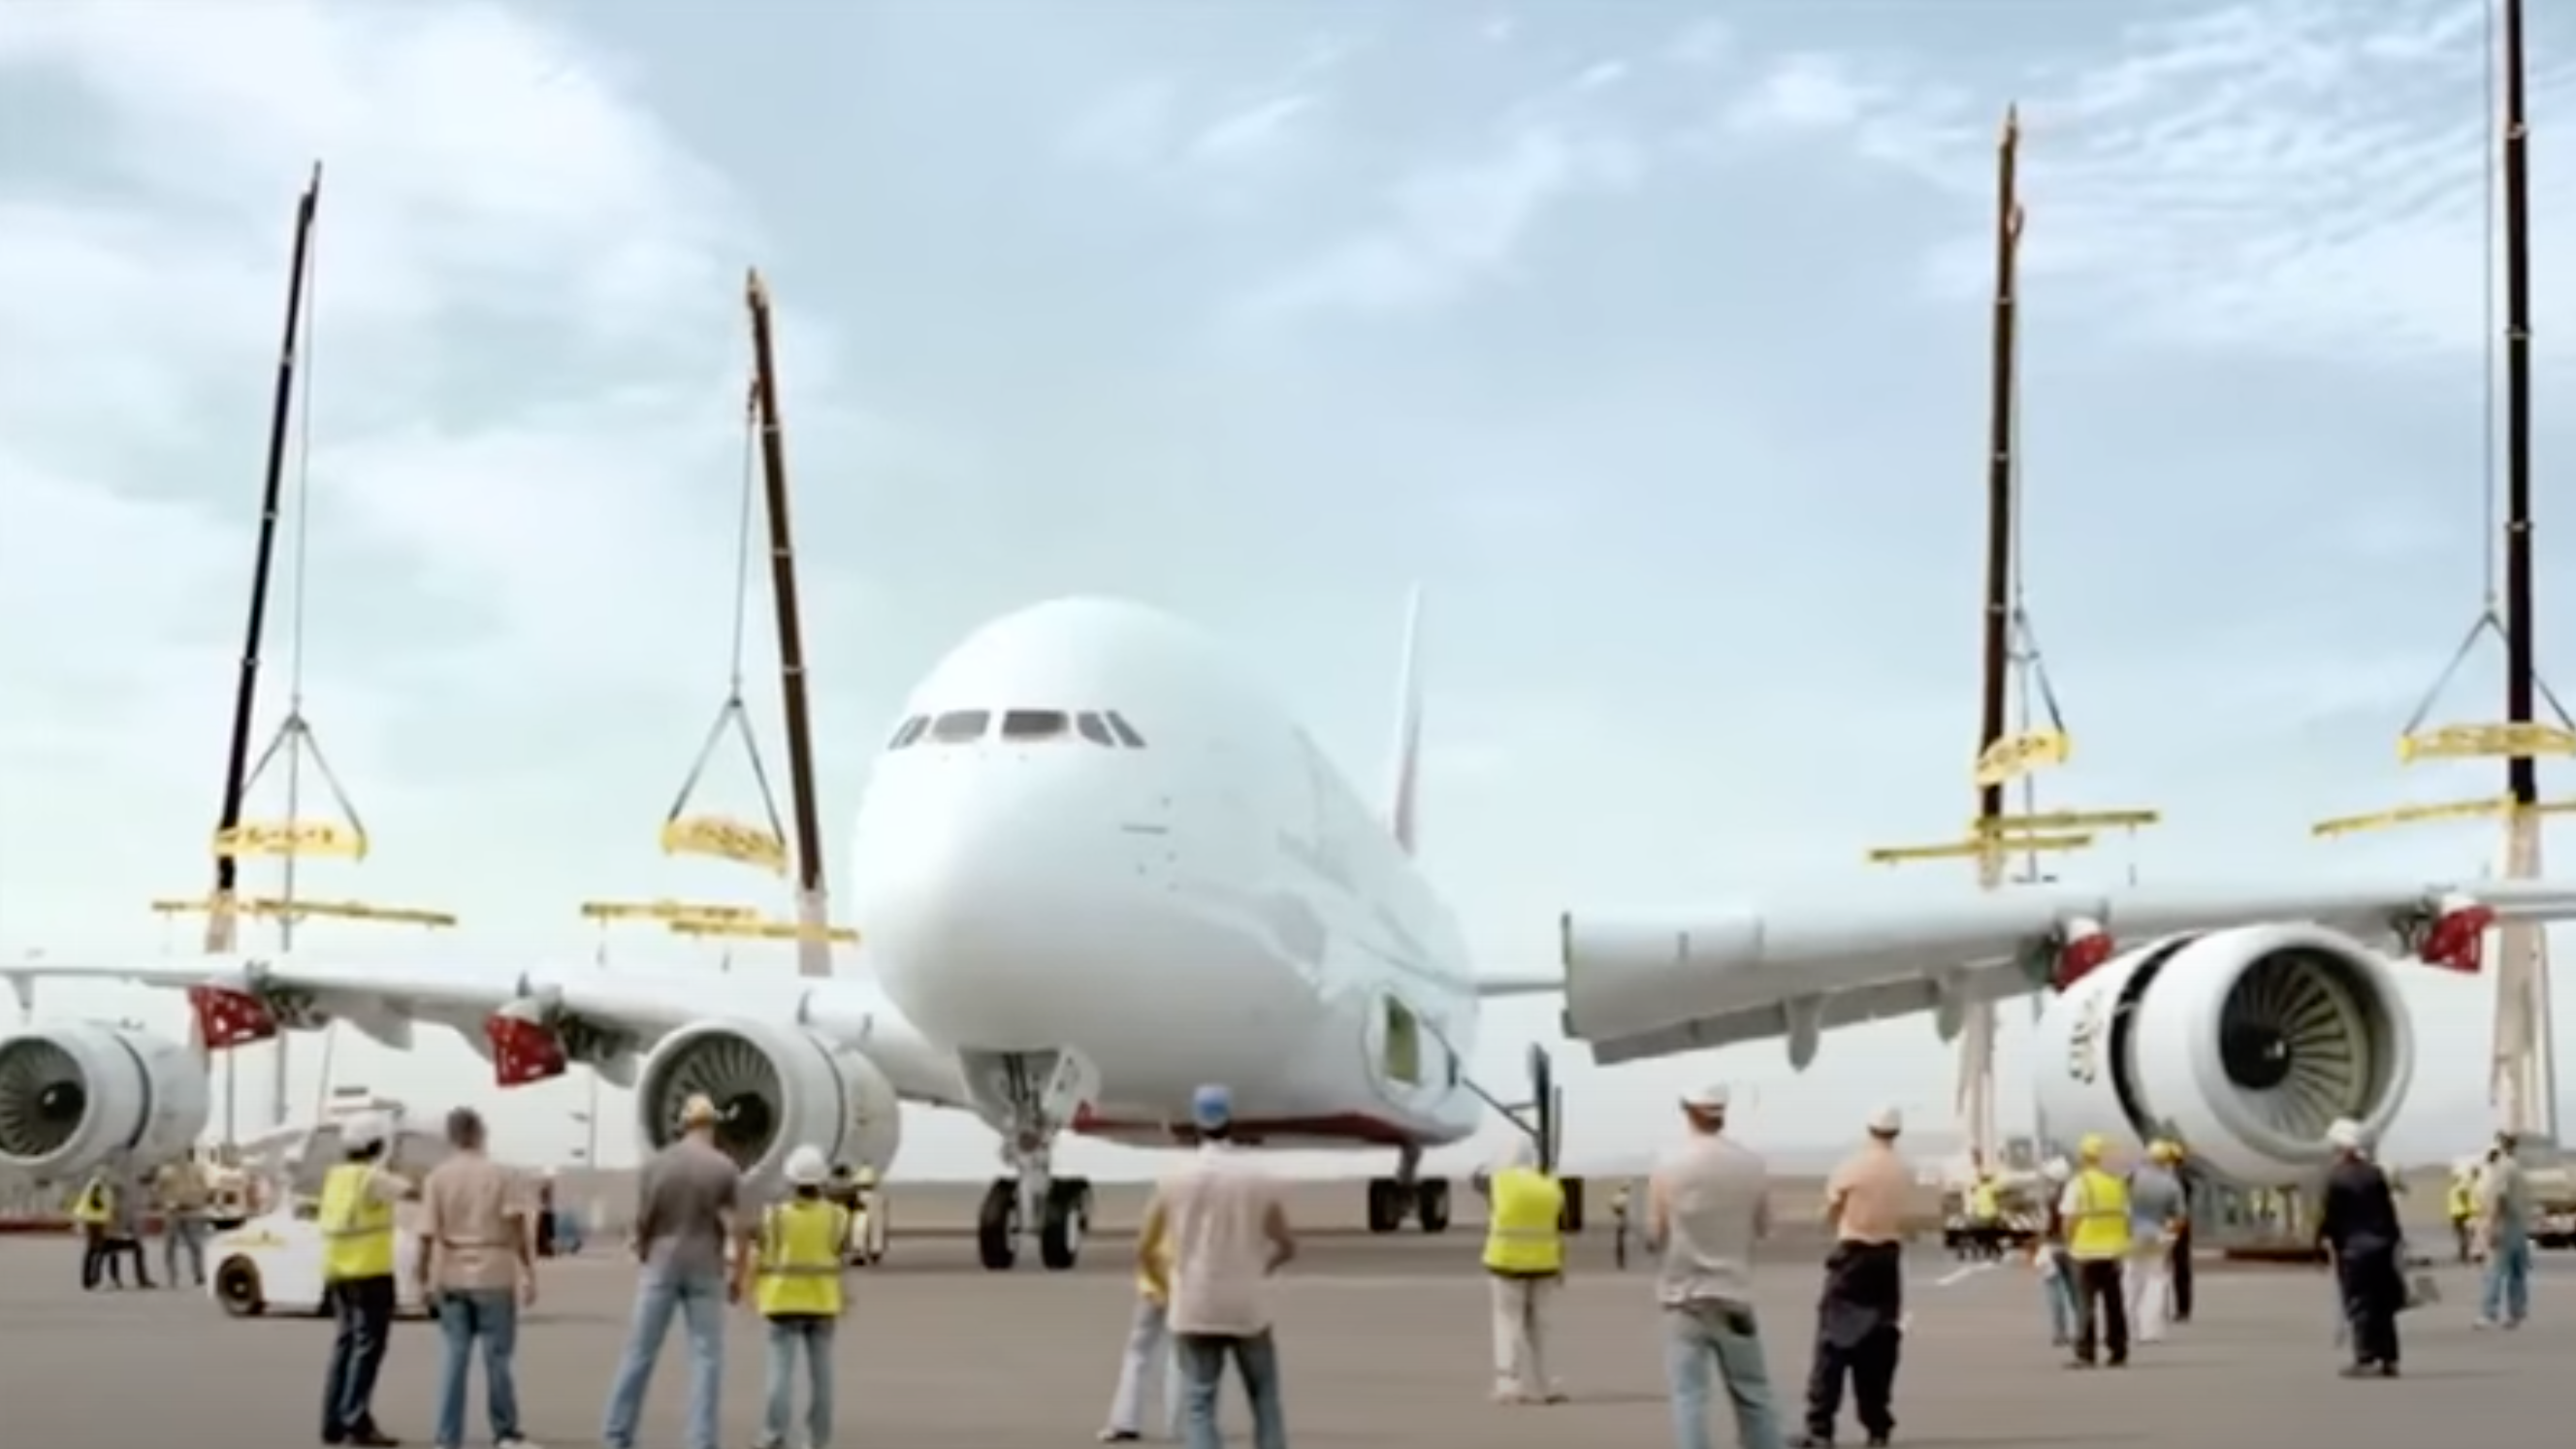 Screen grab from the Emirates case study of airport ramp agents facing a large white plane. 